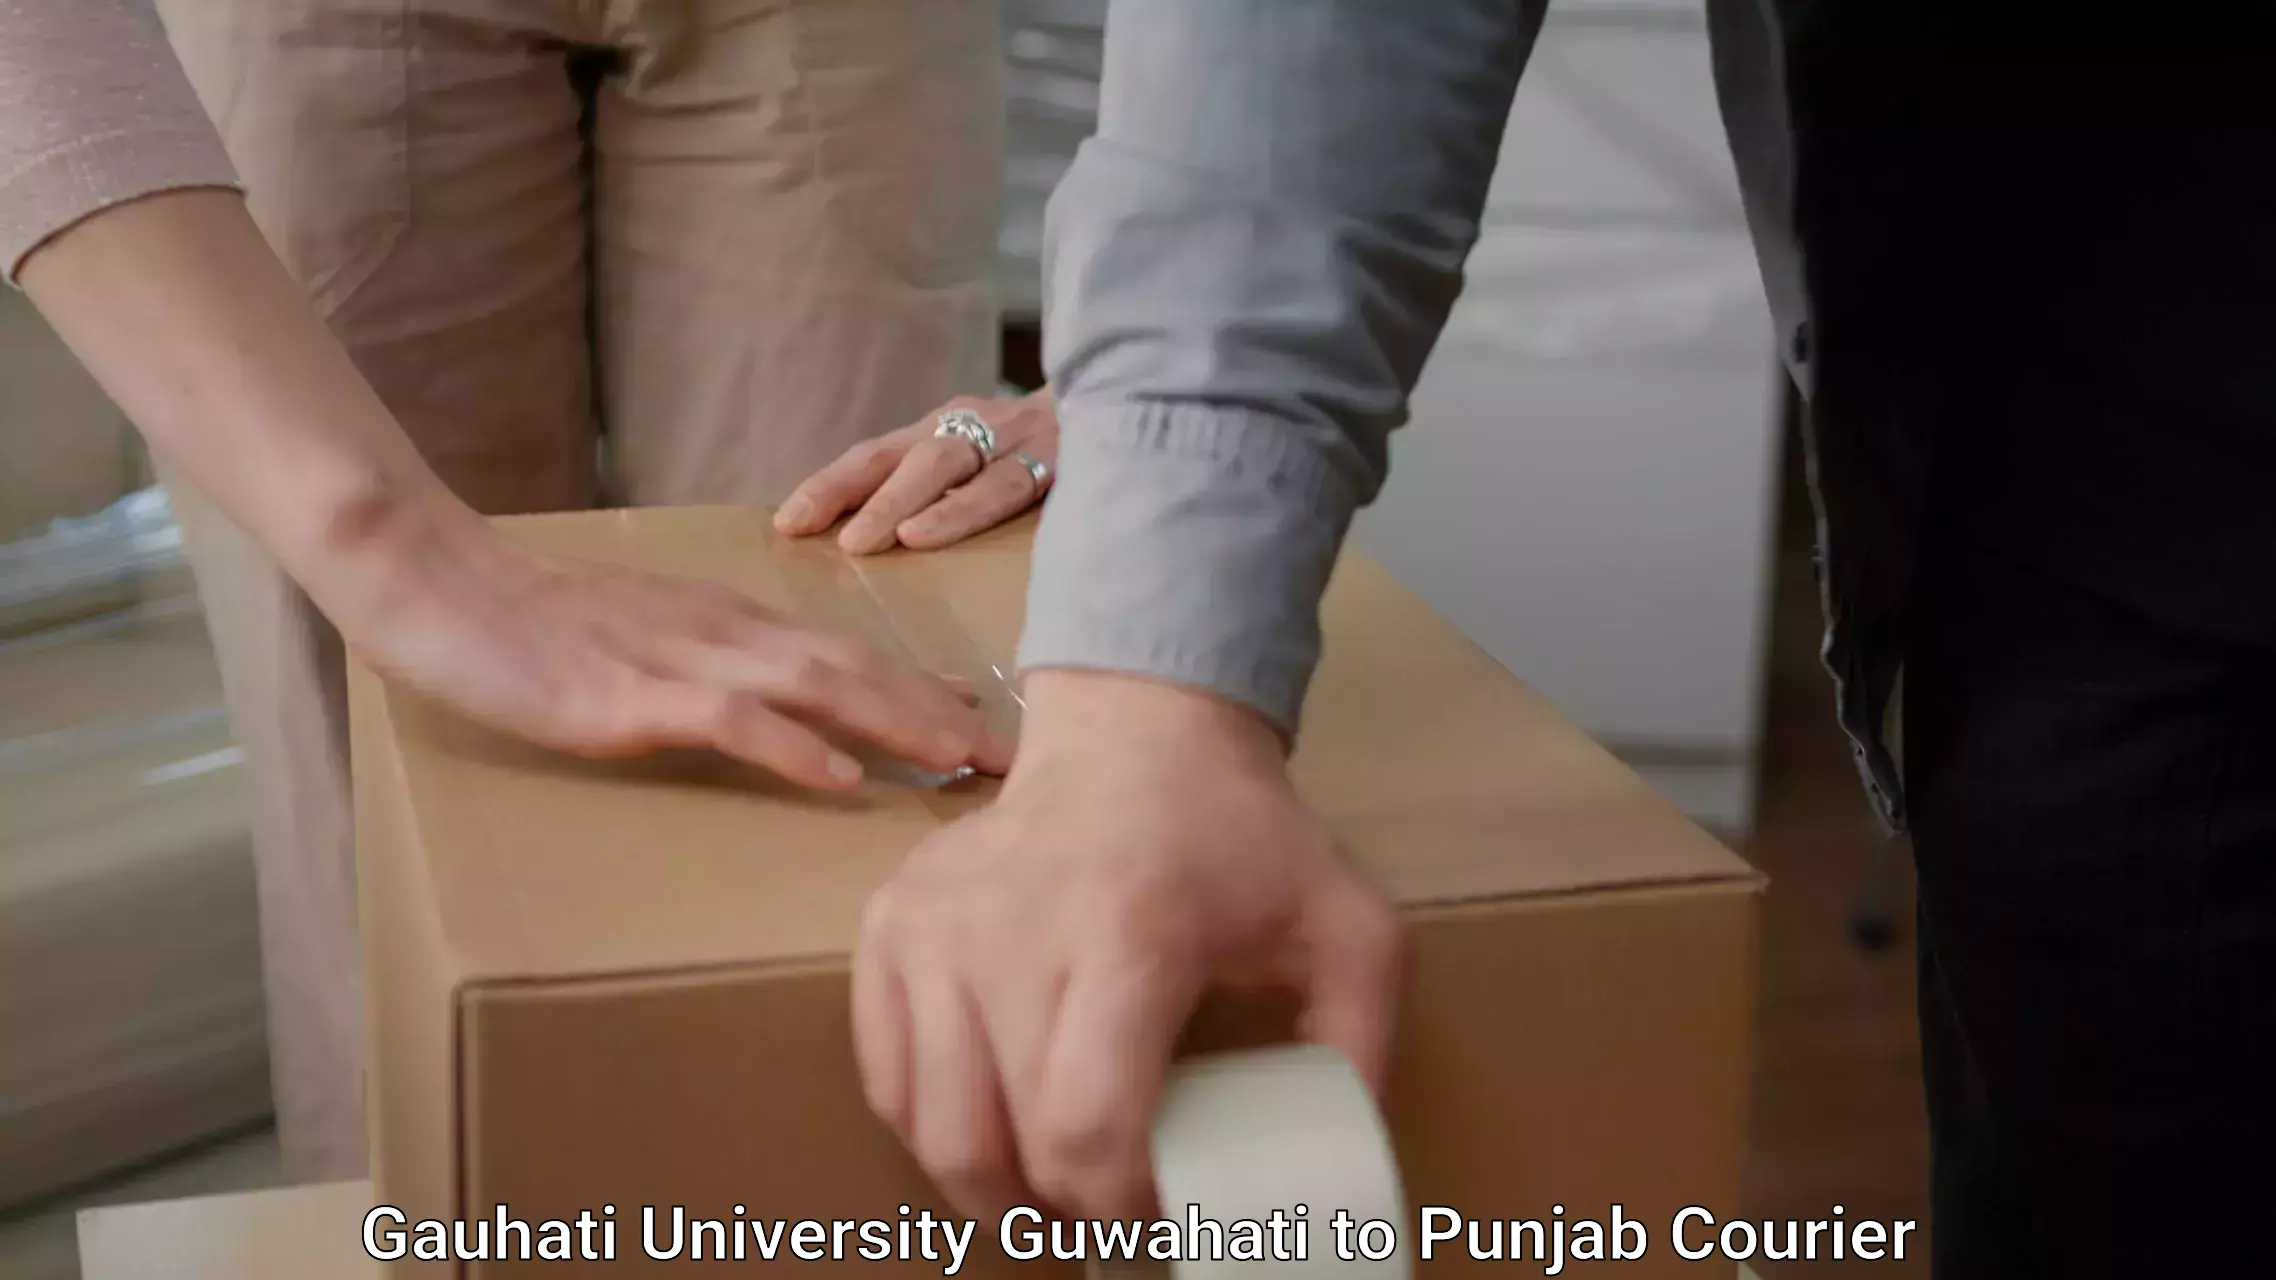 Affordable moving services in Gauhati University Guwahati to Amritsar